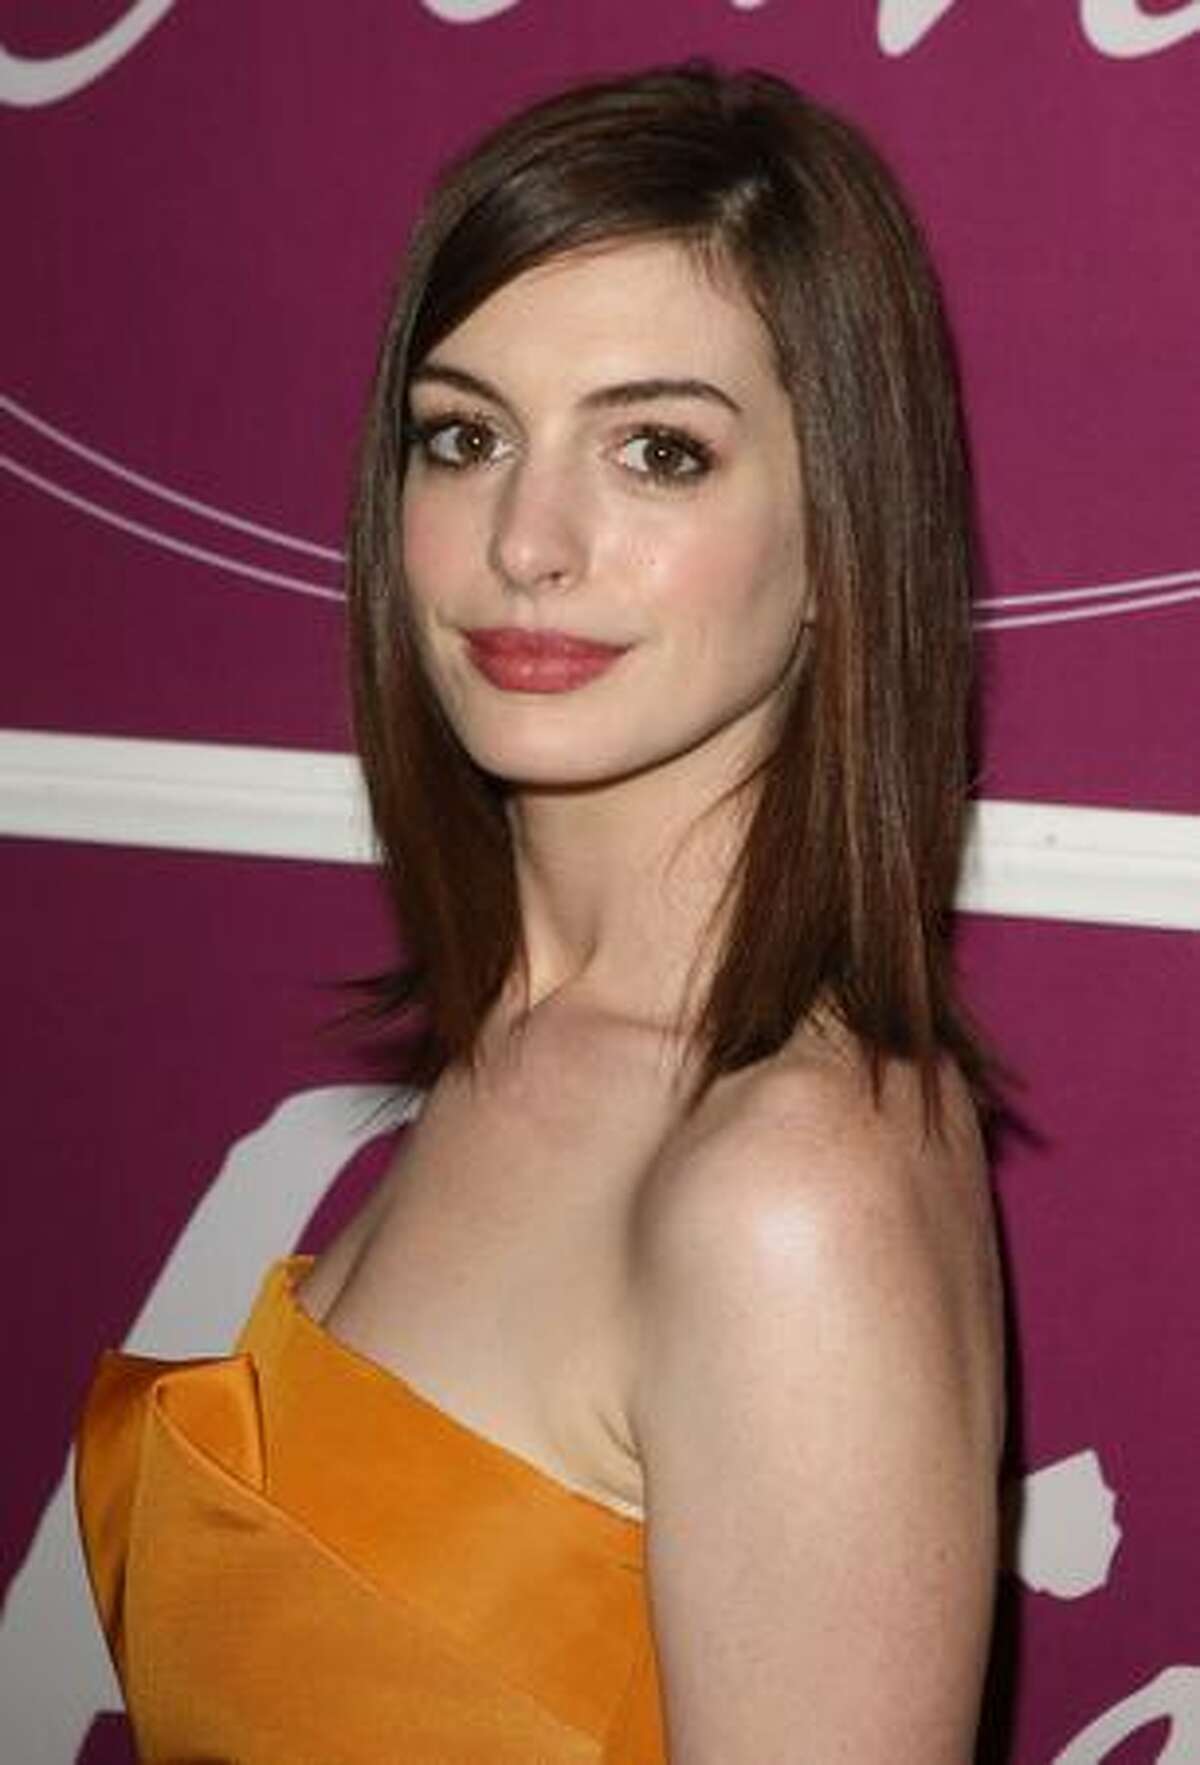 Actress Anne Hathaway arrives at Variety's 1st Annual Power of Women Luncheon at the Beverly Wilshire Hotel in Beverly Hills, California.